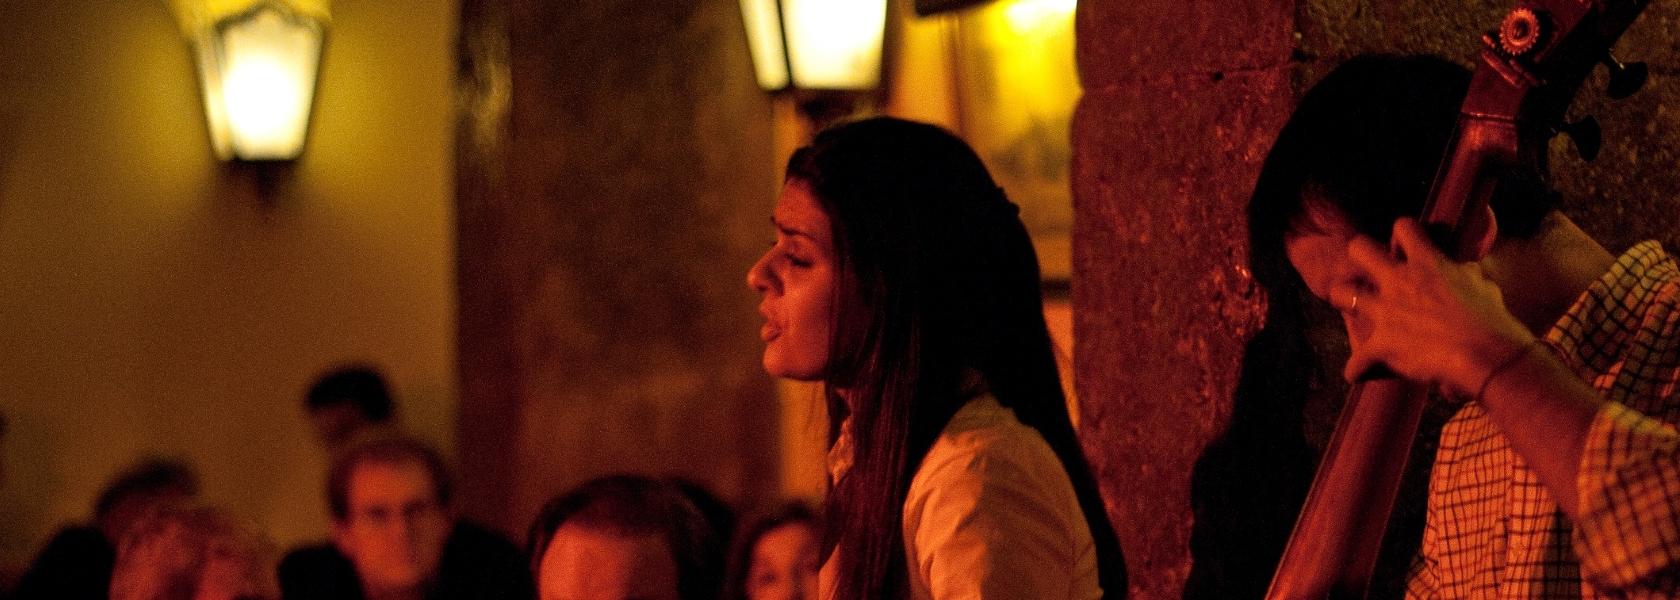 Get emotional with Fado music, an authentic Portuguese expression